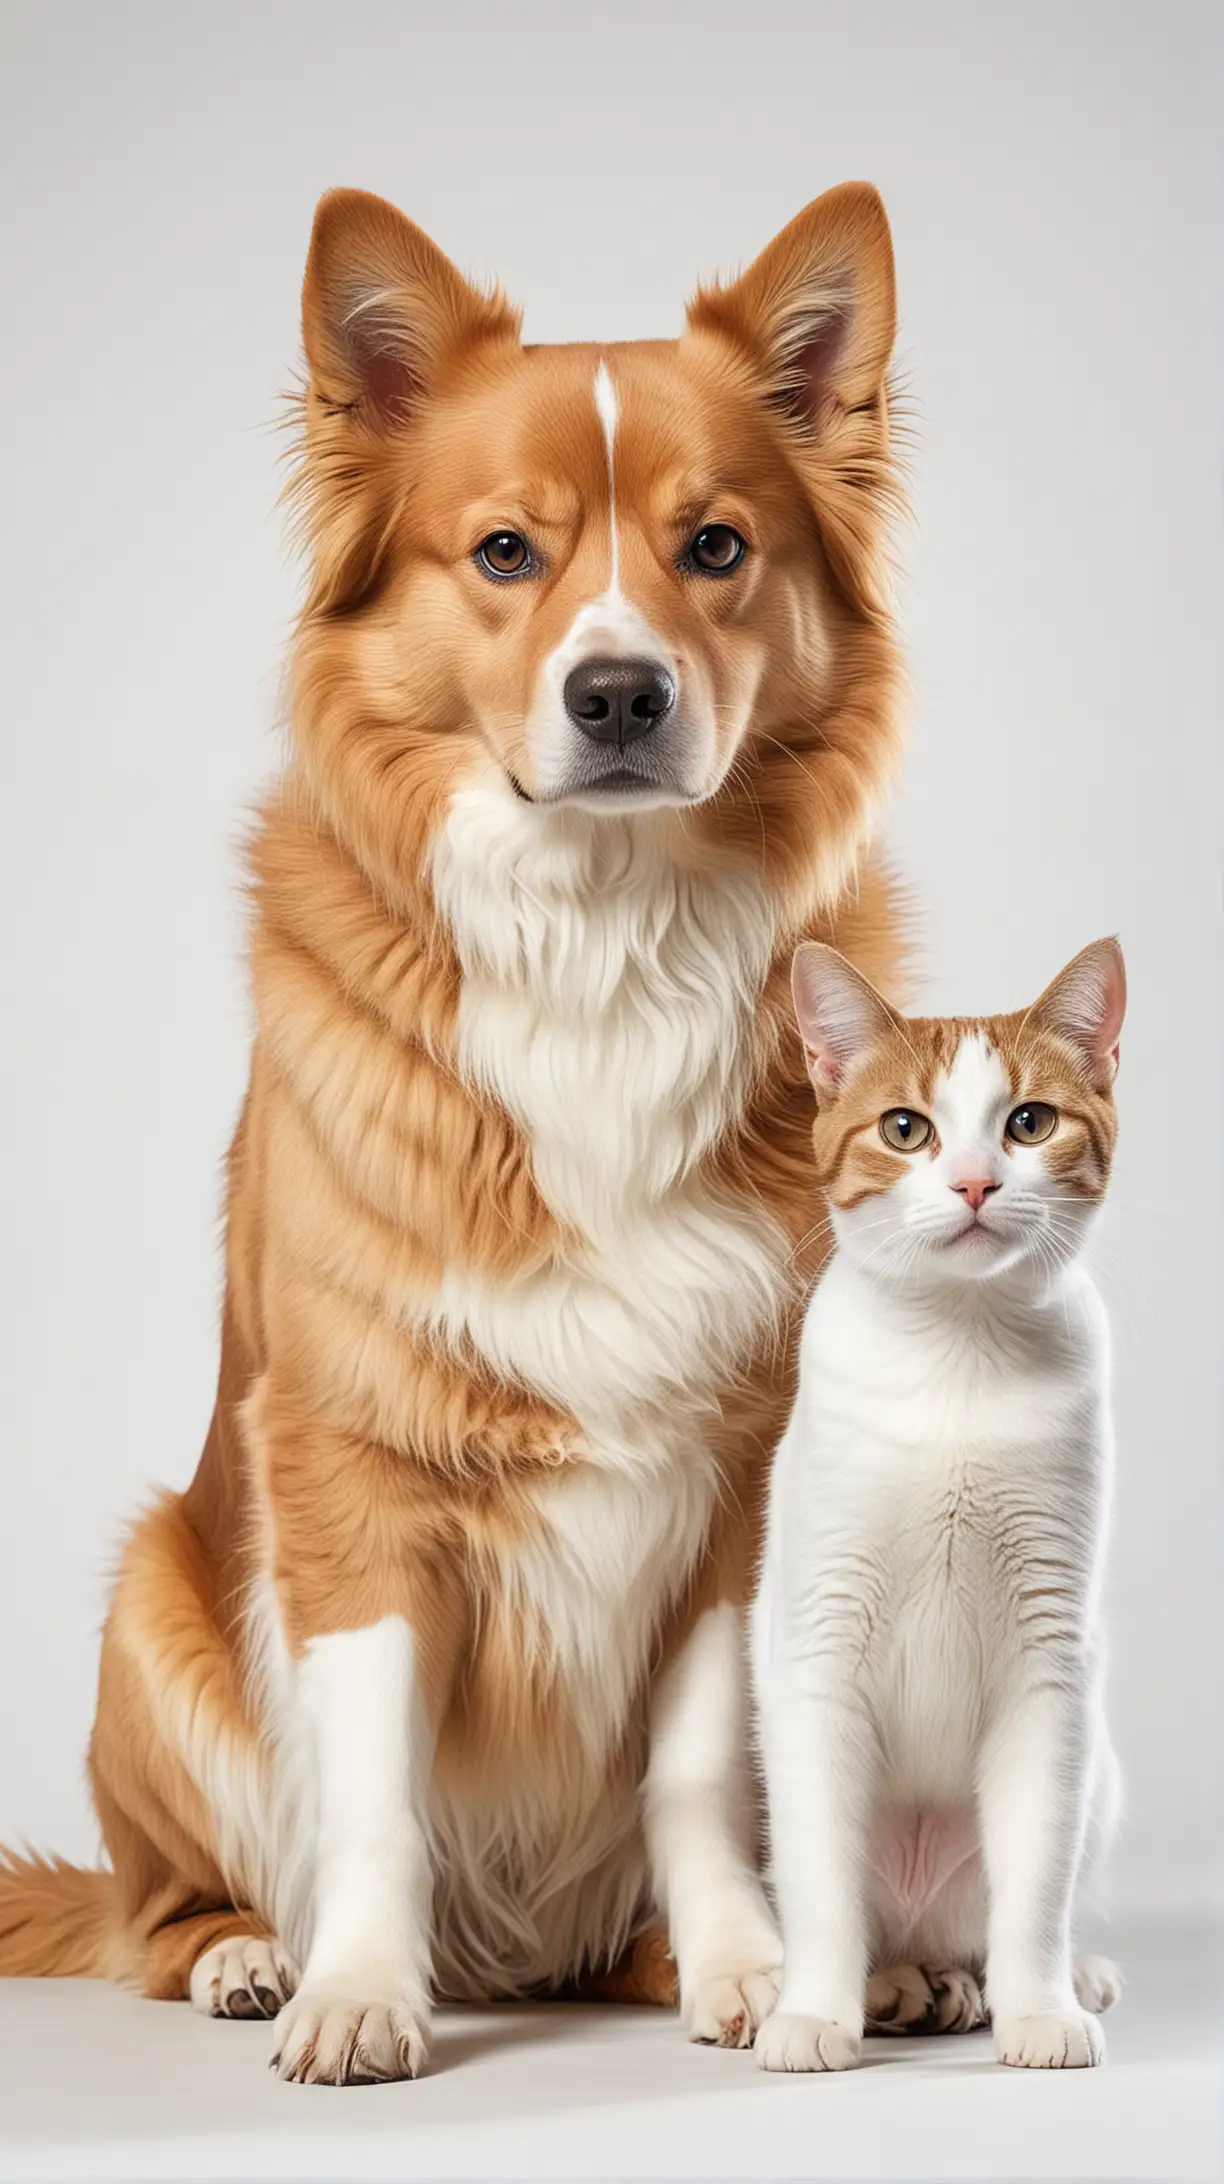 Dog and Cat Posing Together on a White Background